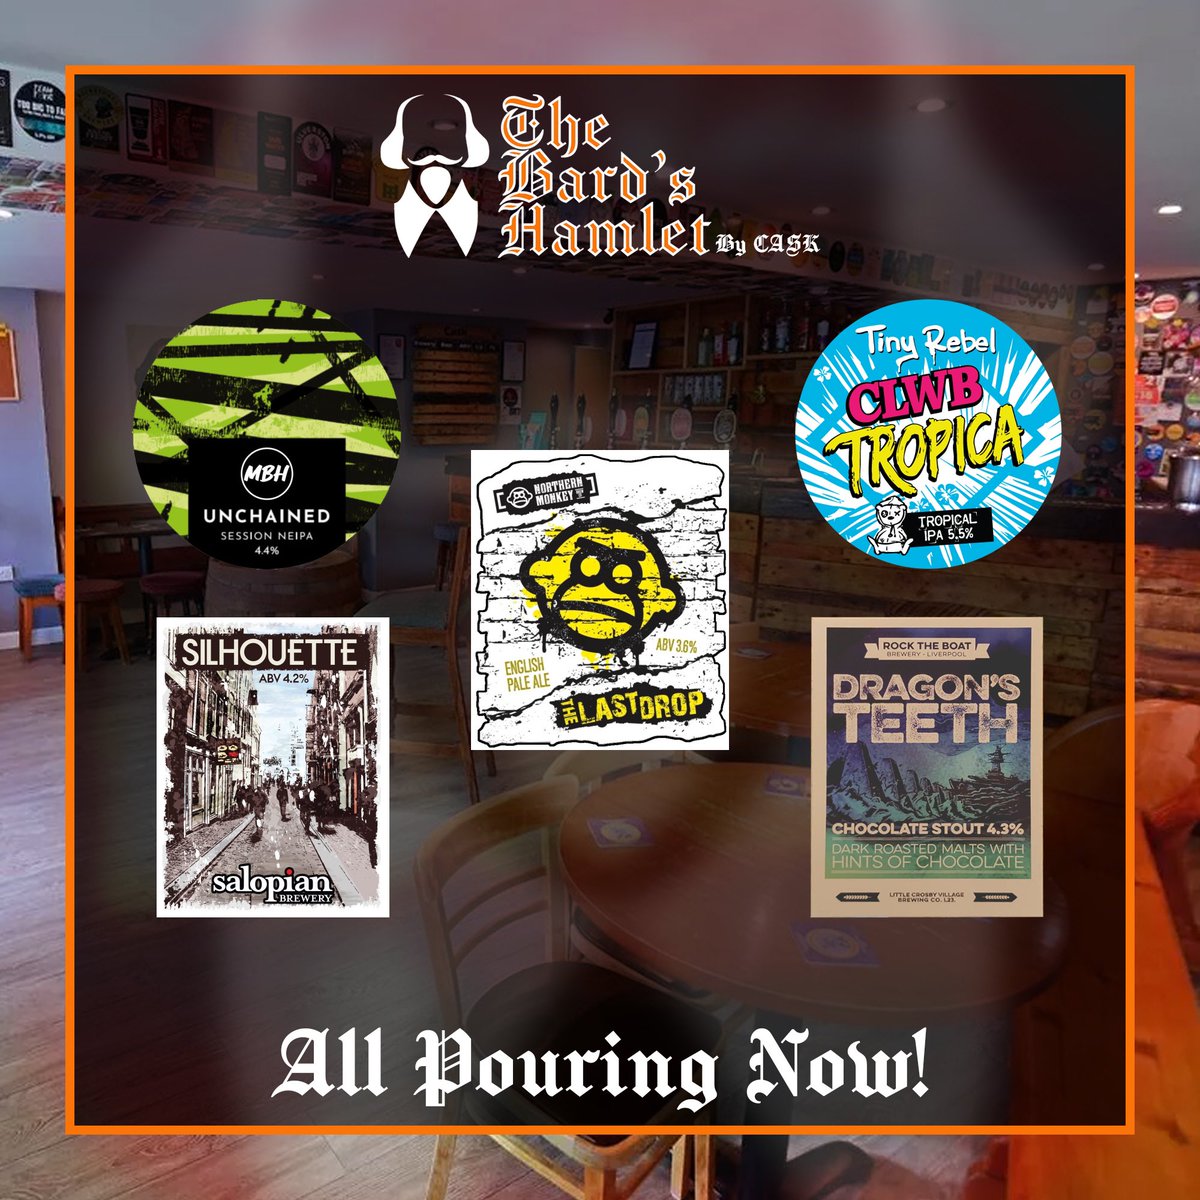 #PUMPDATE! Here’s our lineup for this evening going into the weekend!🤩 We’ve got Unchained from @MBHbeer, Silhouette from @SalopianBrewery, The Last Drop from @NMonkeyBrewCo, Clwb Tropica from @tinyrebelbrewco & Dragon’s Teeth from @RockTheBoatAle!🍻